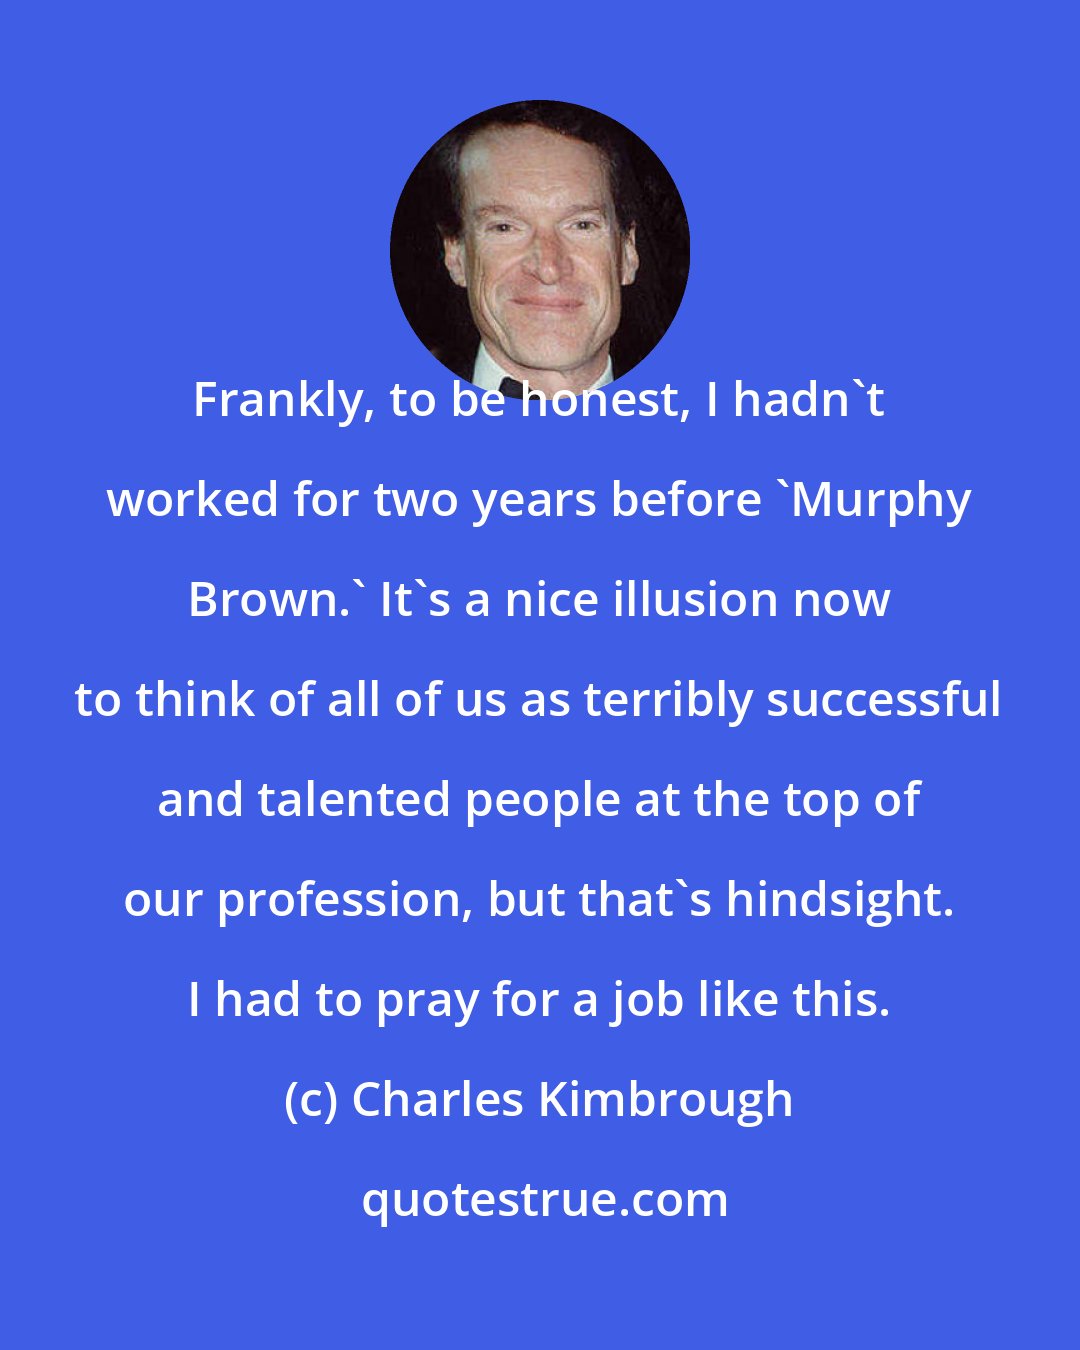 Charles Kimbrough: Frankly, to be honest, I hadn't worked for two years before 'Murphy Brown.' It's a nice illusion now to think of all of us as terribly successful and talented people at the top of our profession, but that's hindsight. I had to pray for a job like this.